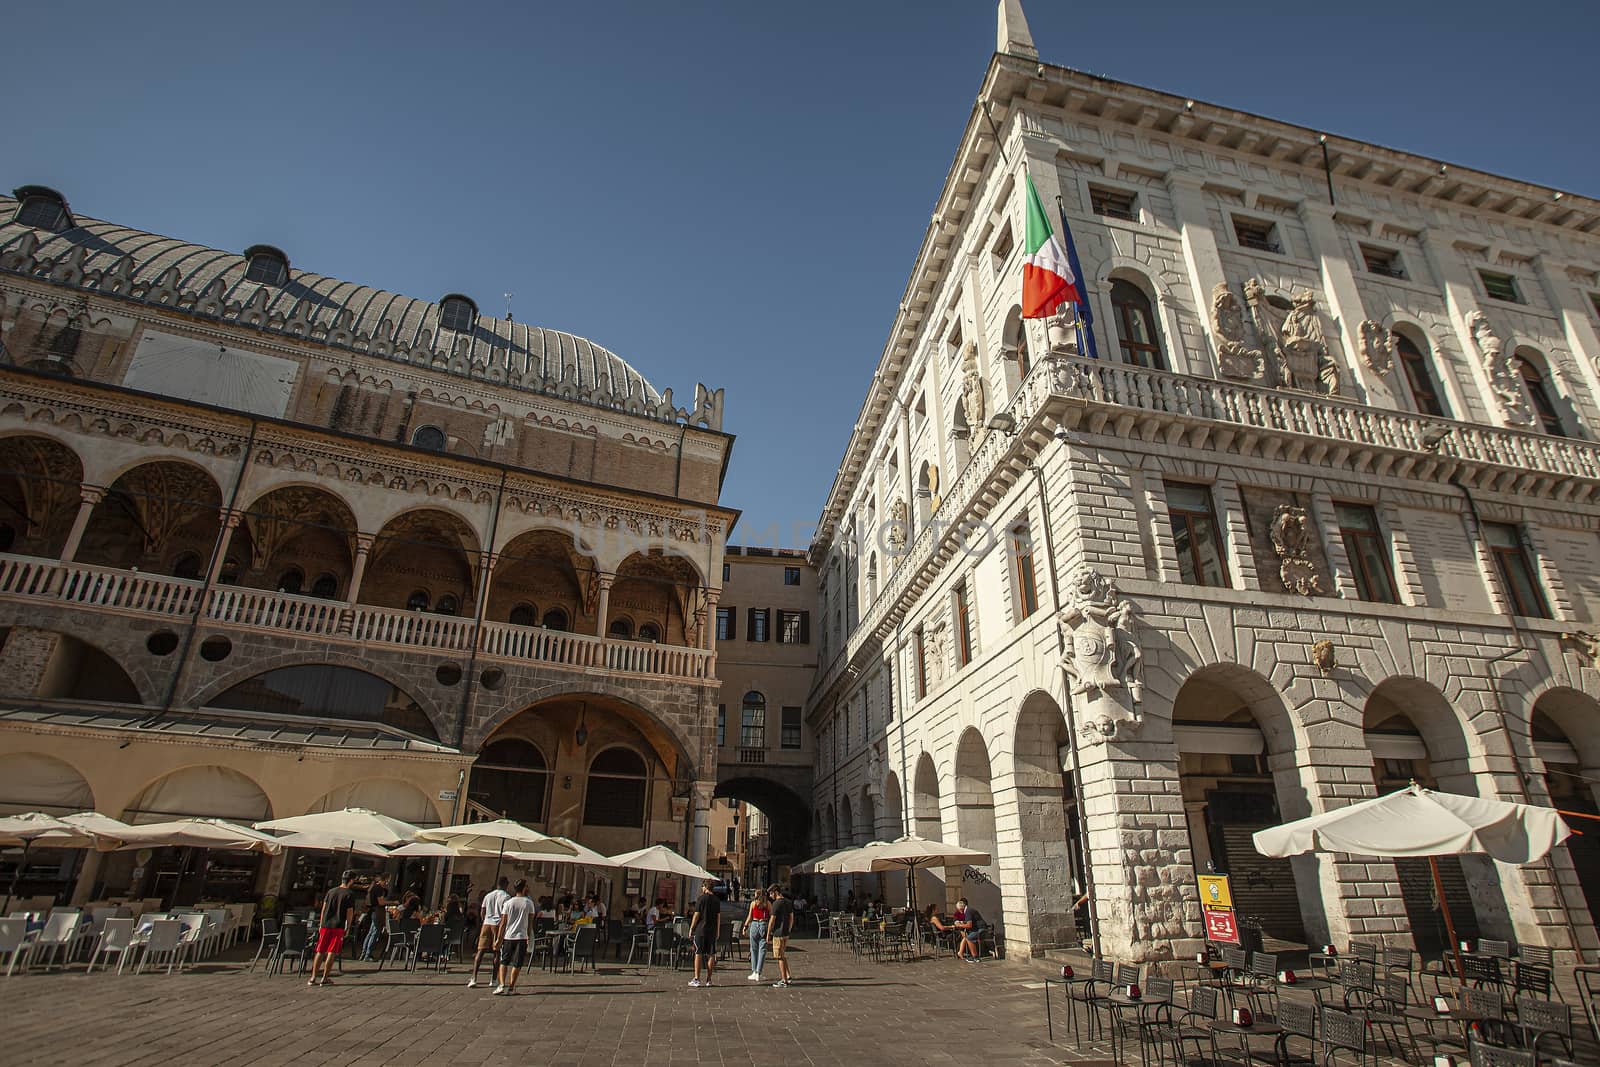 PADOVA, ITALY 17 JULY 2020: Piazza dei Signori in Padua in Italy, one the most famous place in the city